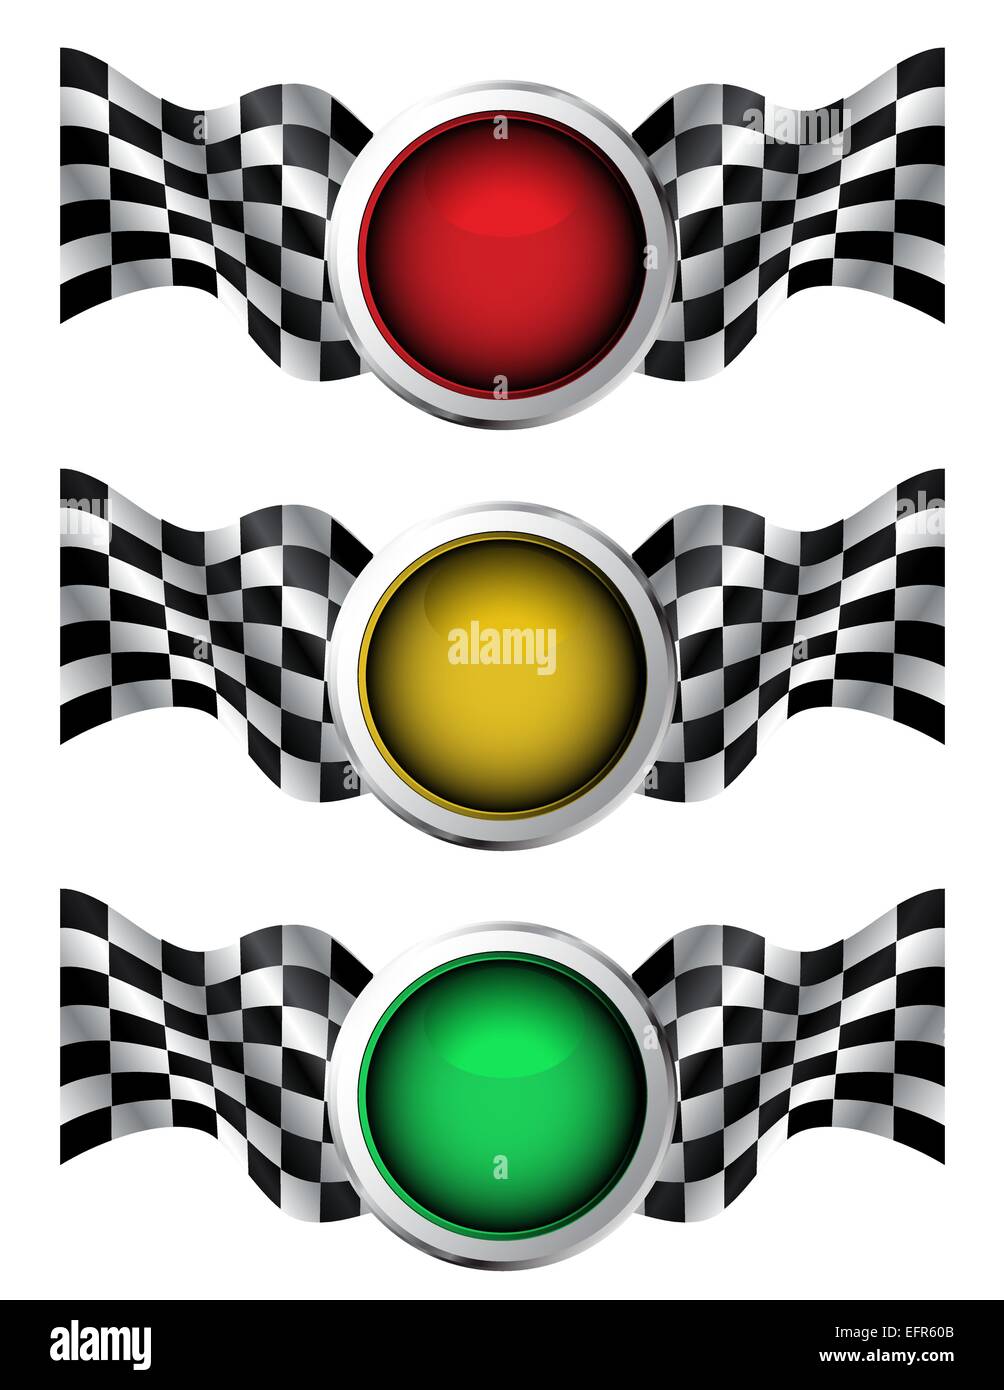 Illustration of a Digital Collage Of Red, Yellow And Green Traffic Lights With Checkered Racing Flags Stock Vector